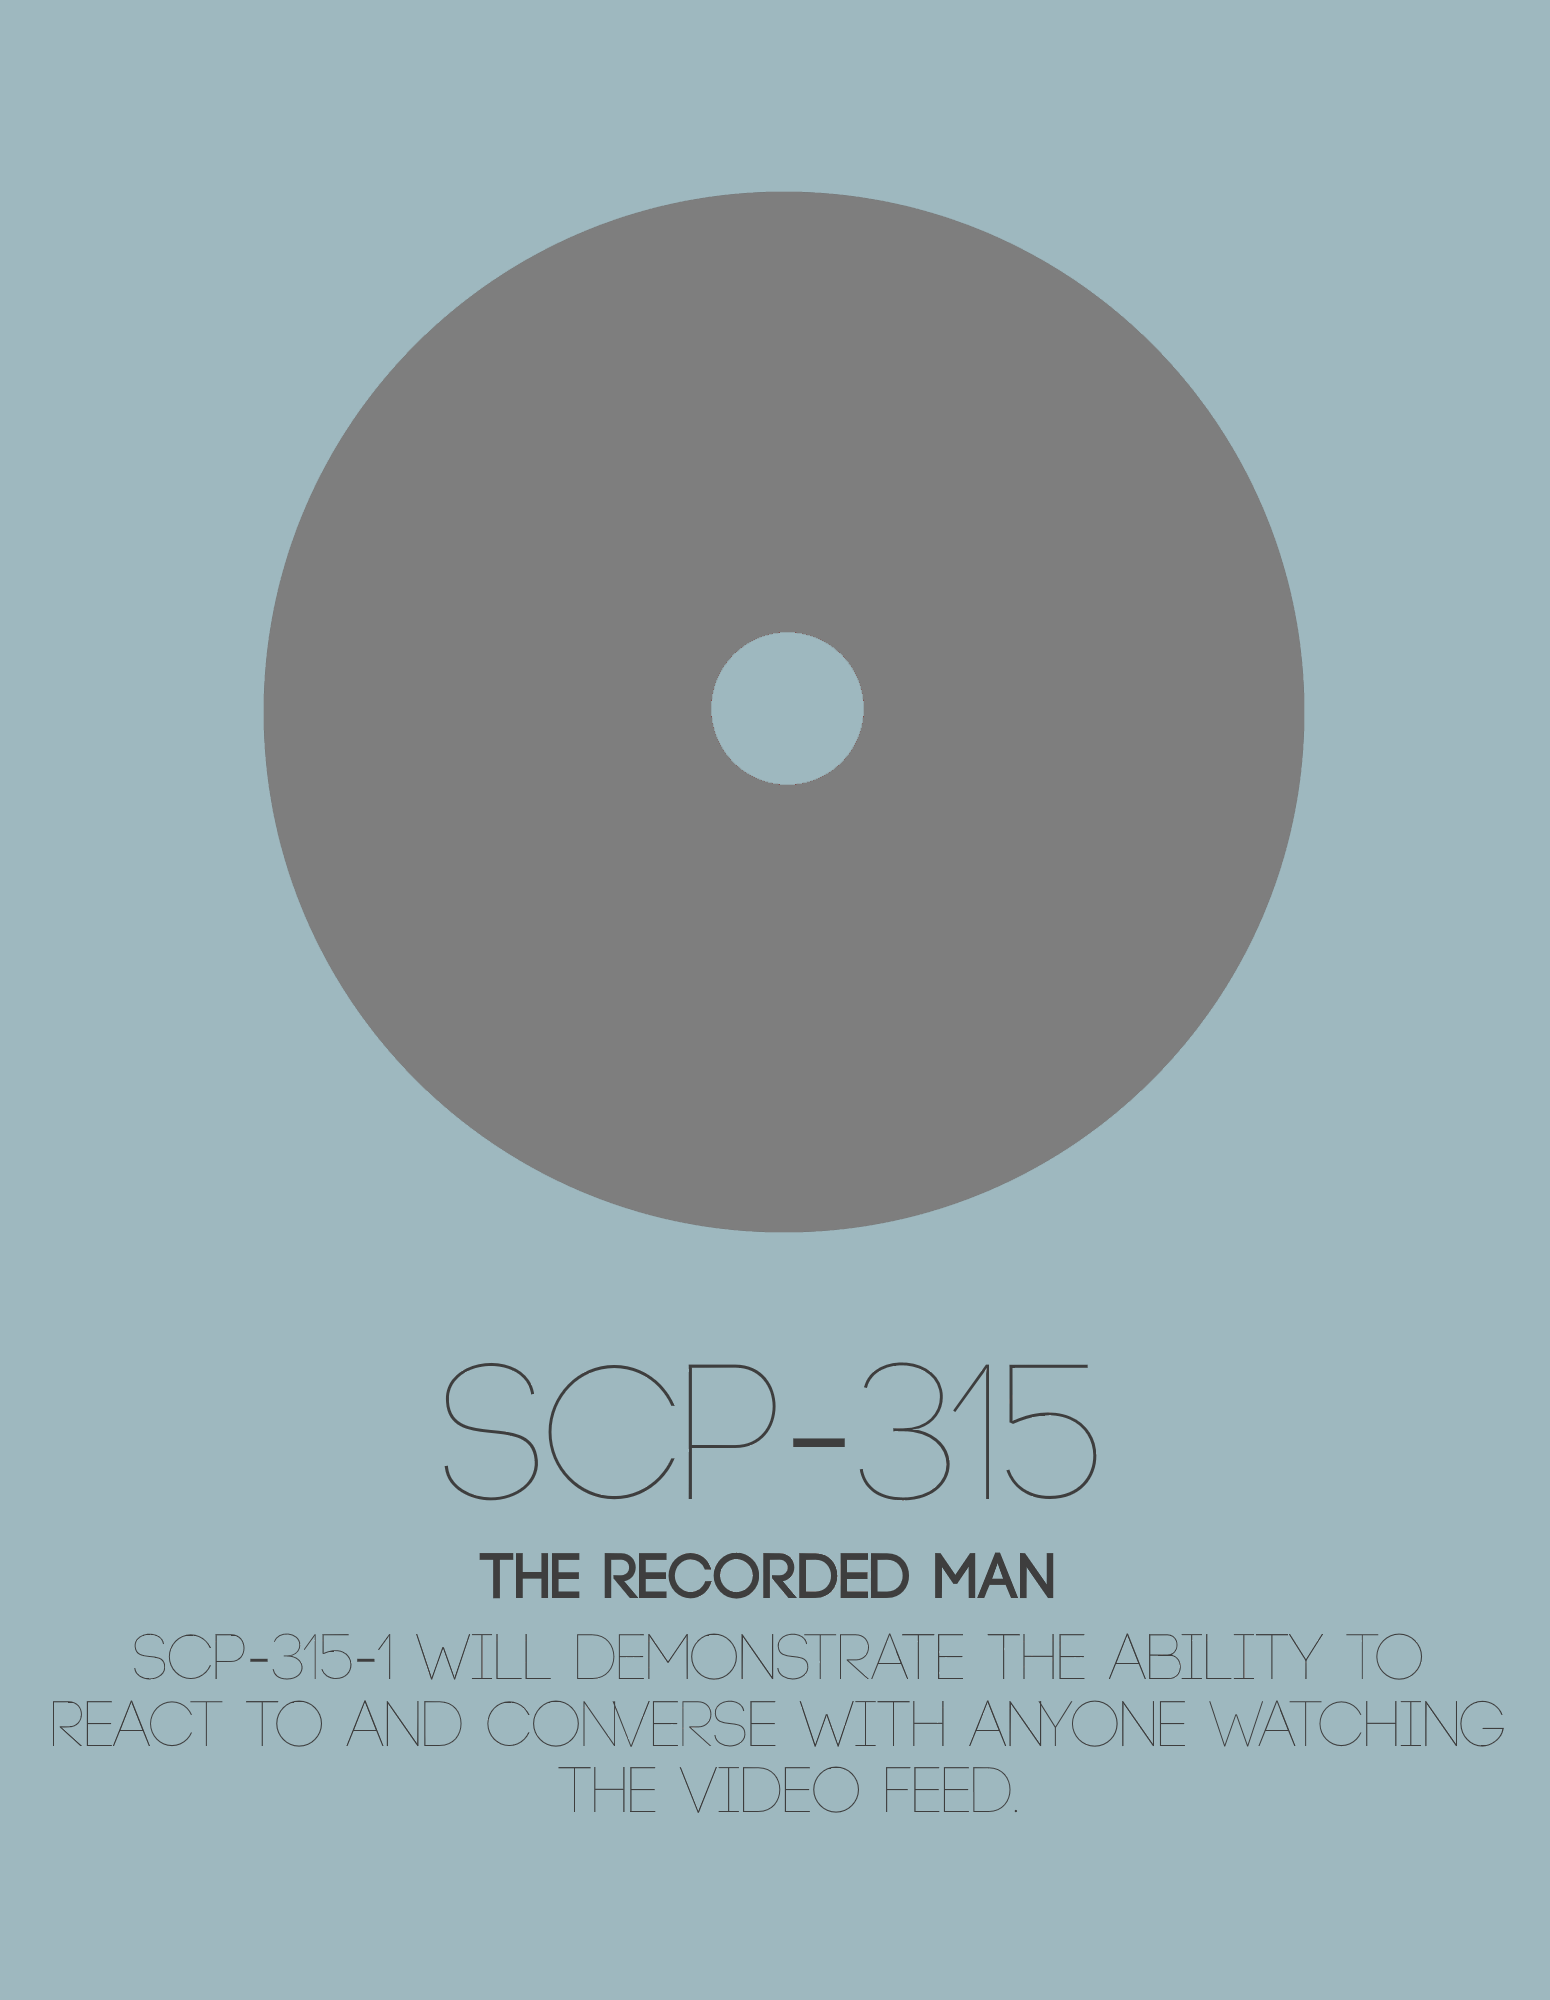 SCP-055 - The Heritage Collection Poster Set by IAmPuzzlr on